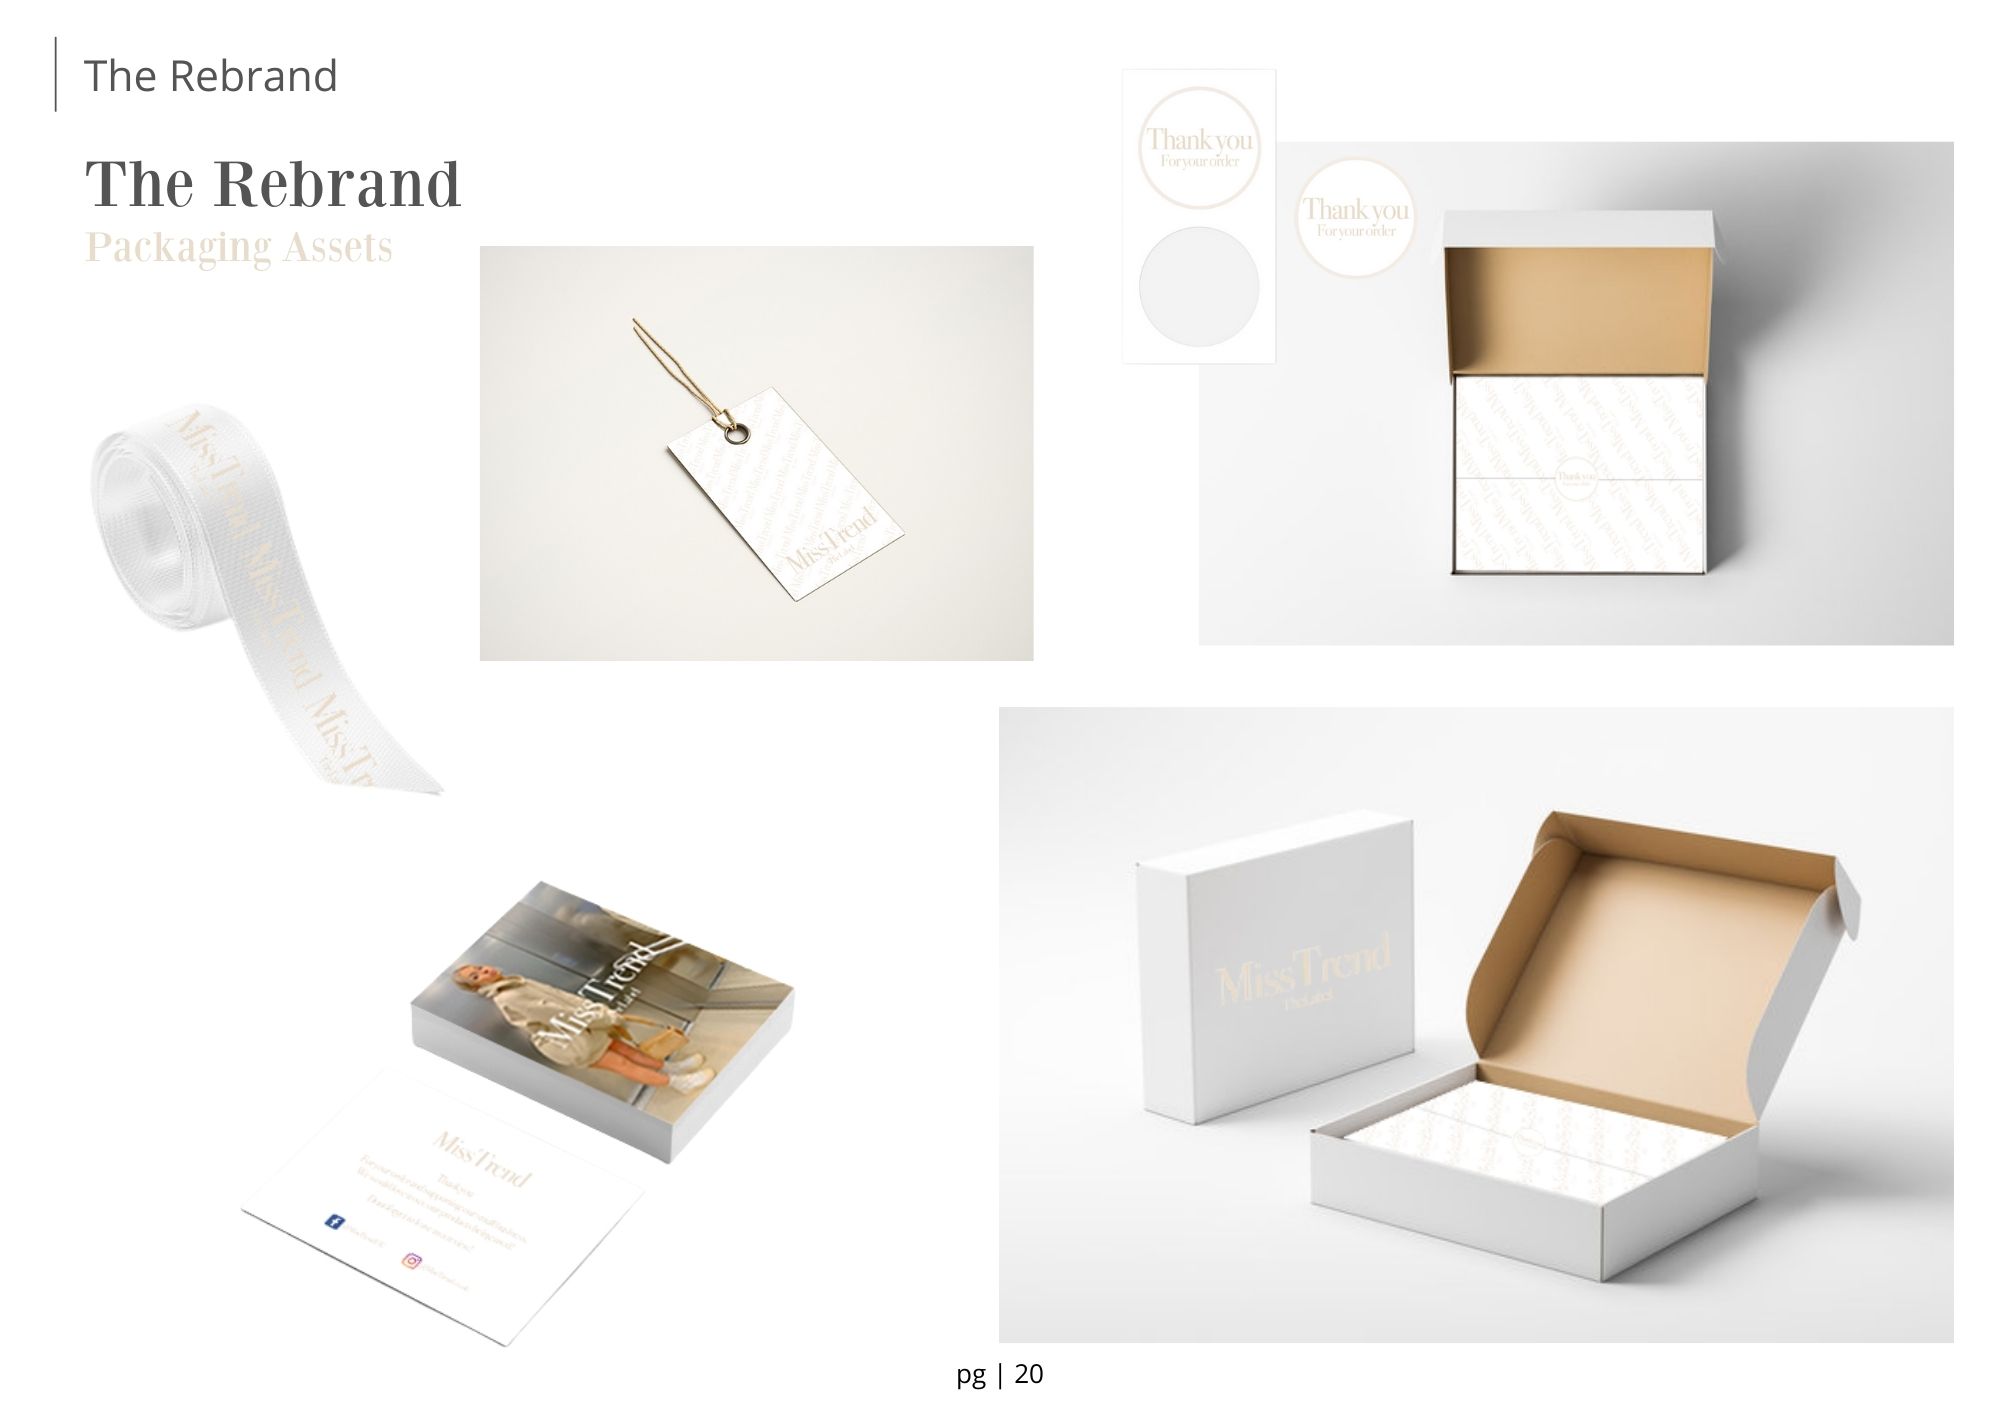 FMP fashion communication and promotion work by Amelia Gentile showing packaging mockups in the style of the rebrand.